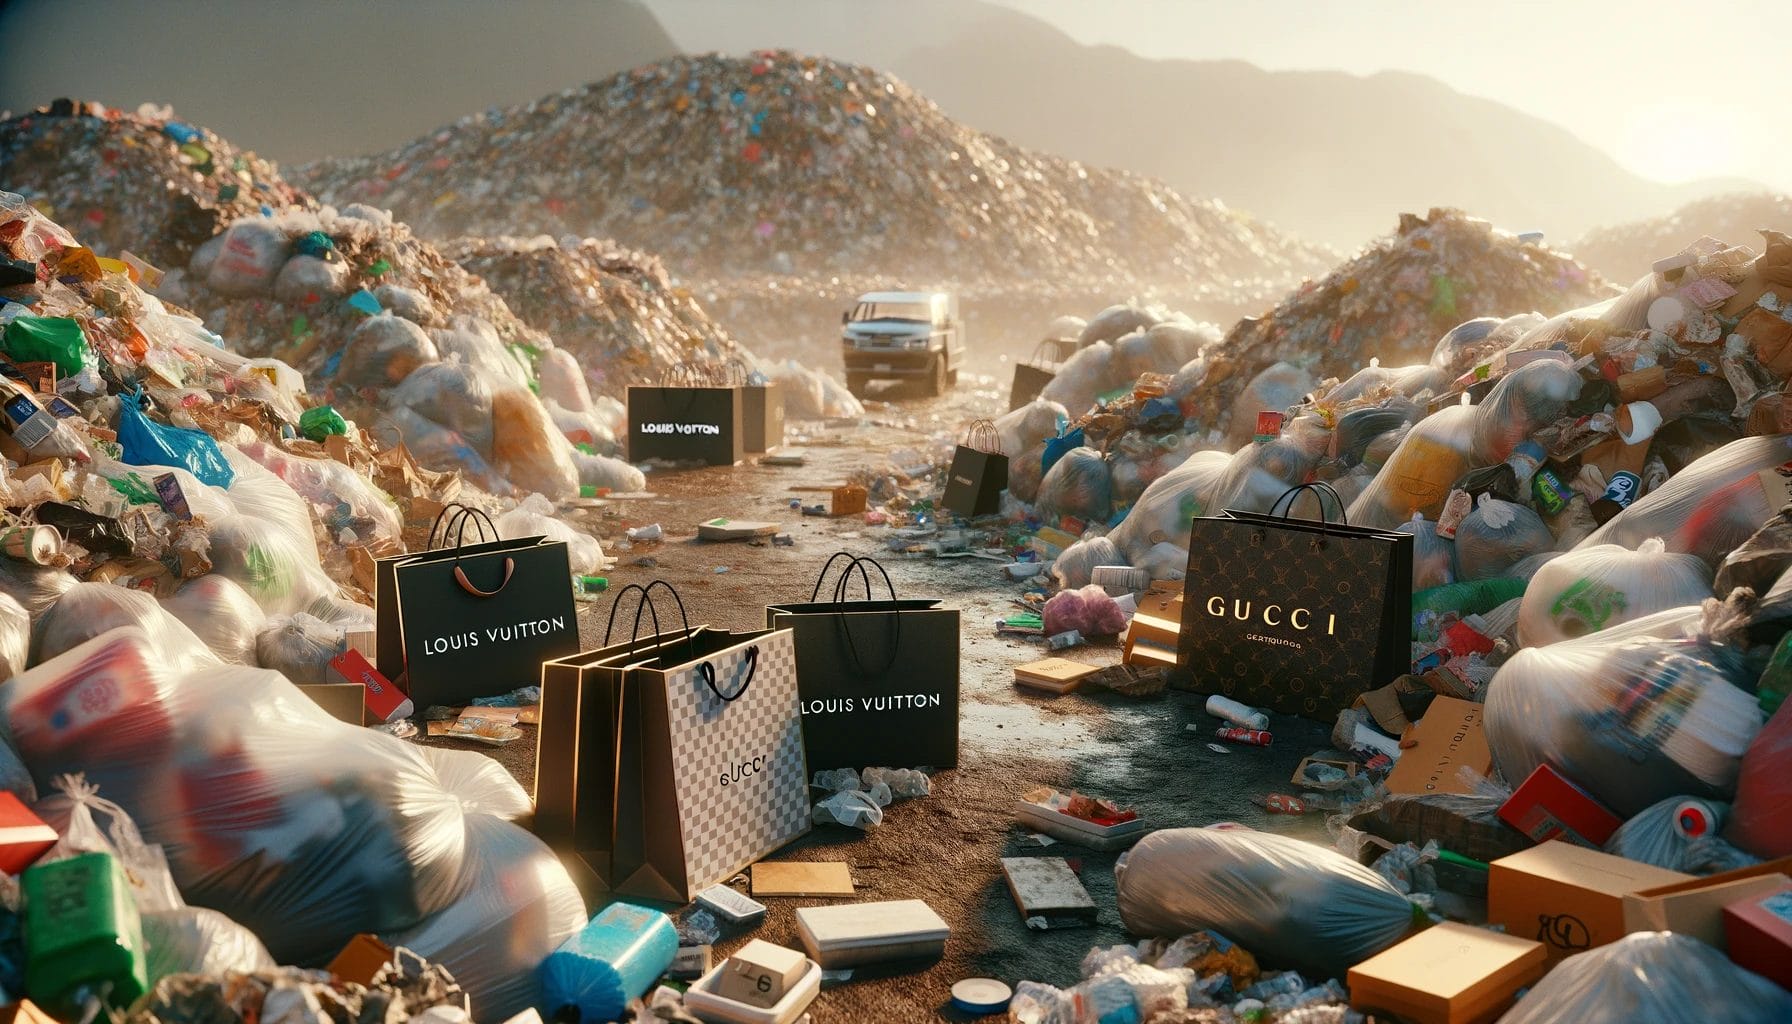 Highly realistic depiction of luxury shopping bags from brands like Louis Vuitton and Gucci scattered among heaps of trash in a landfill